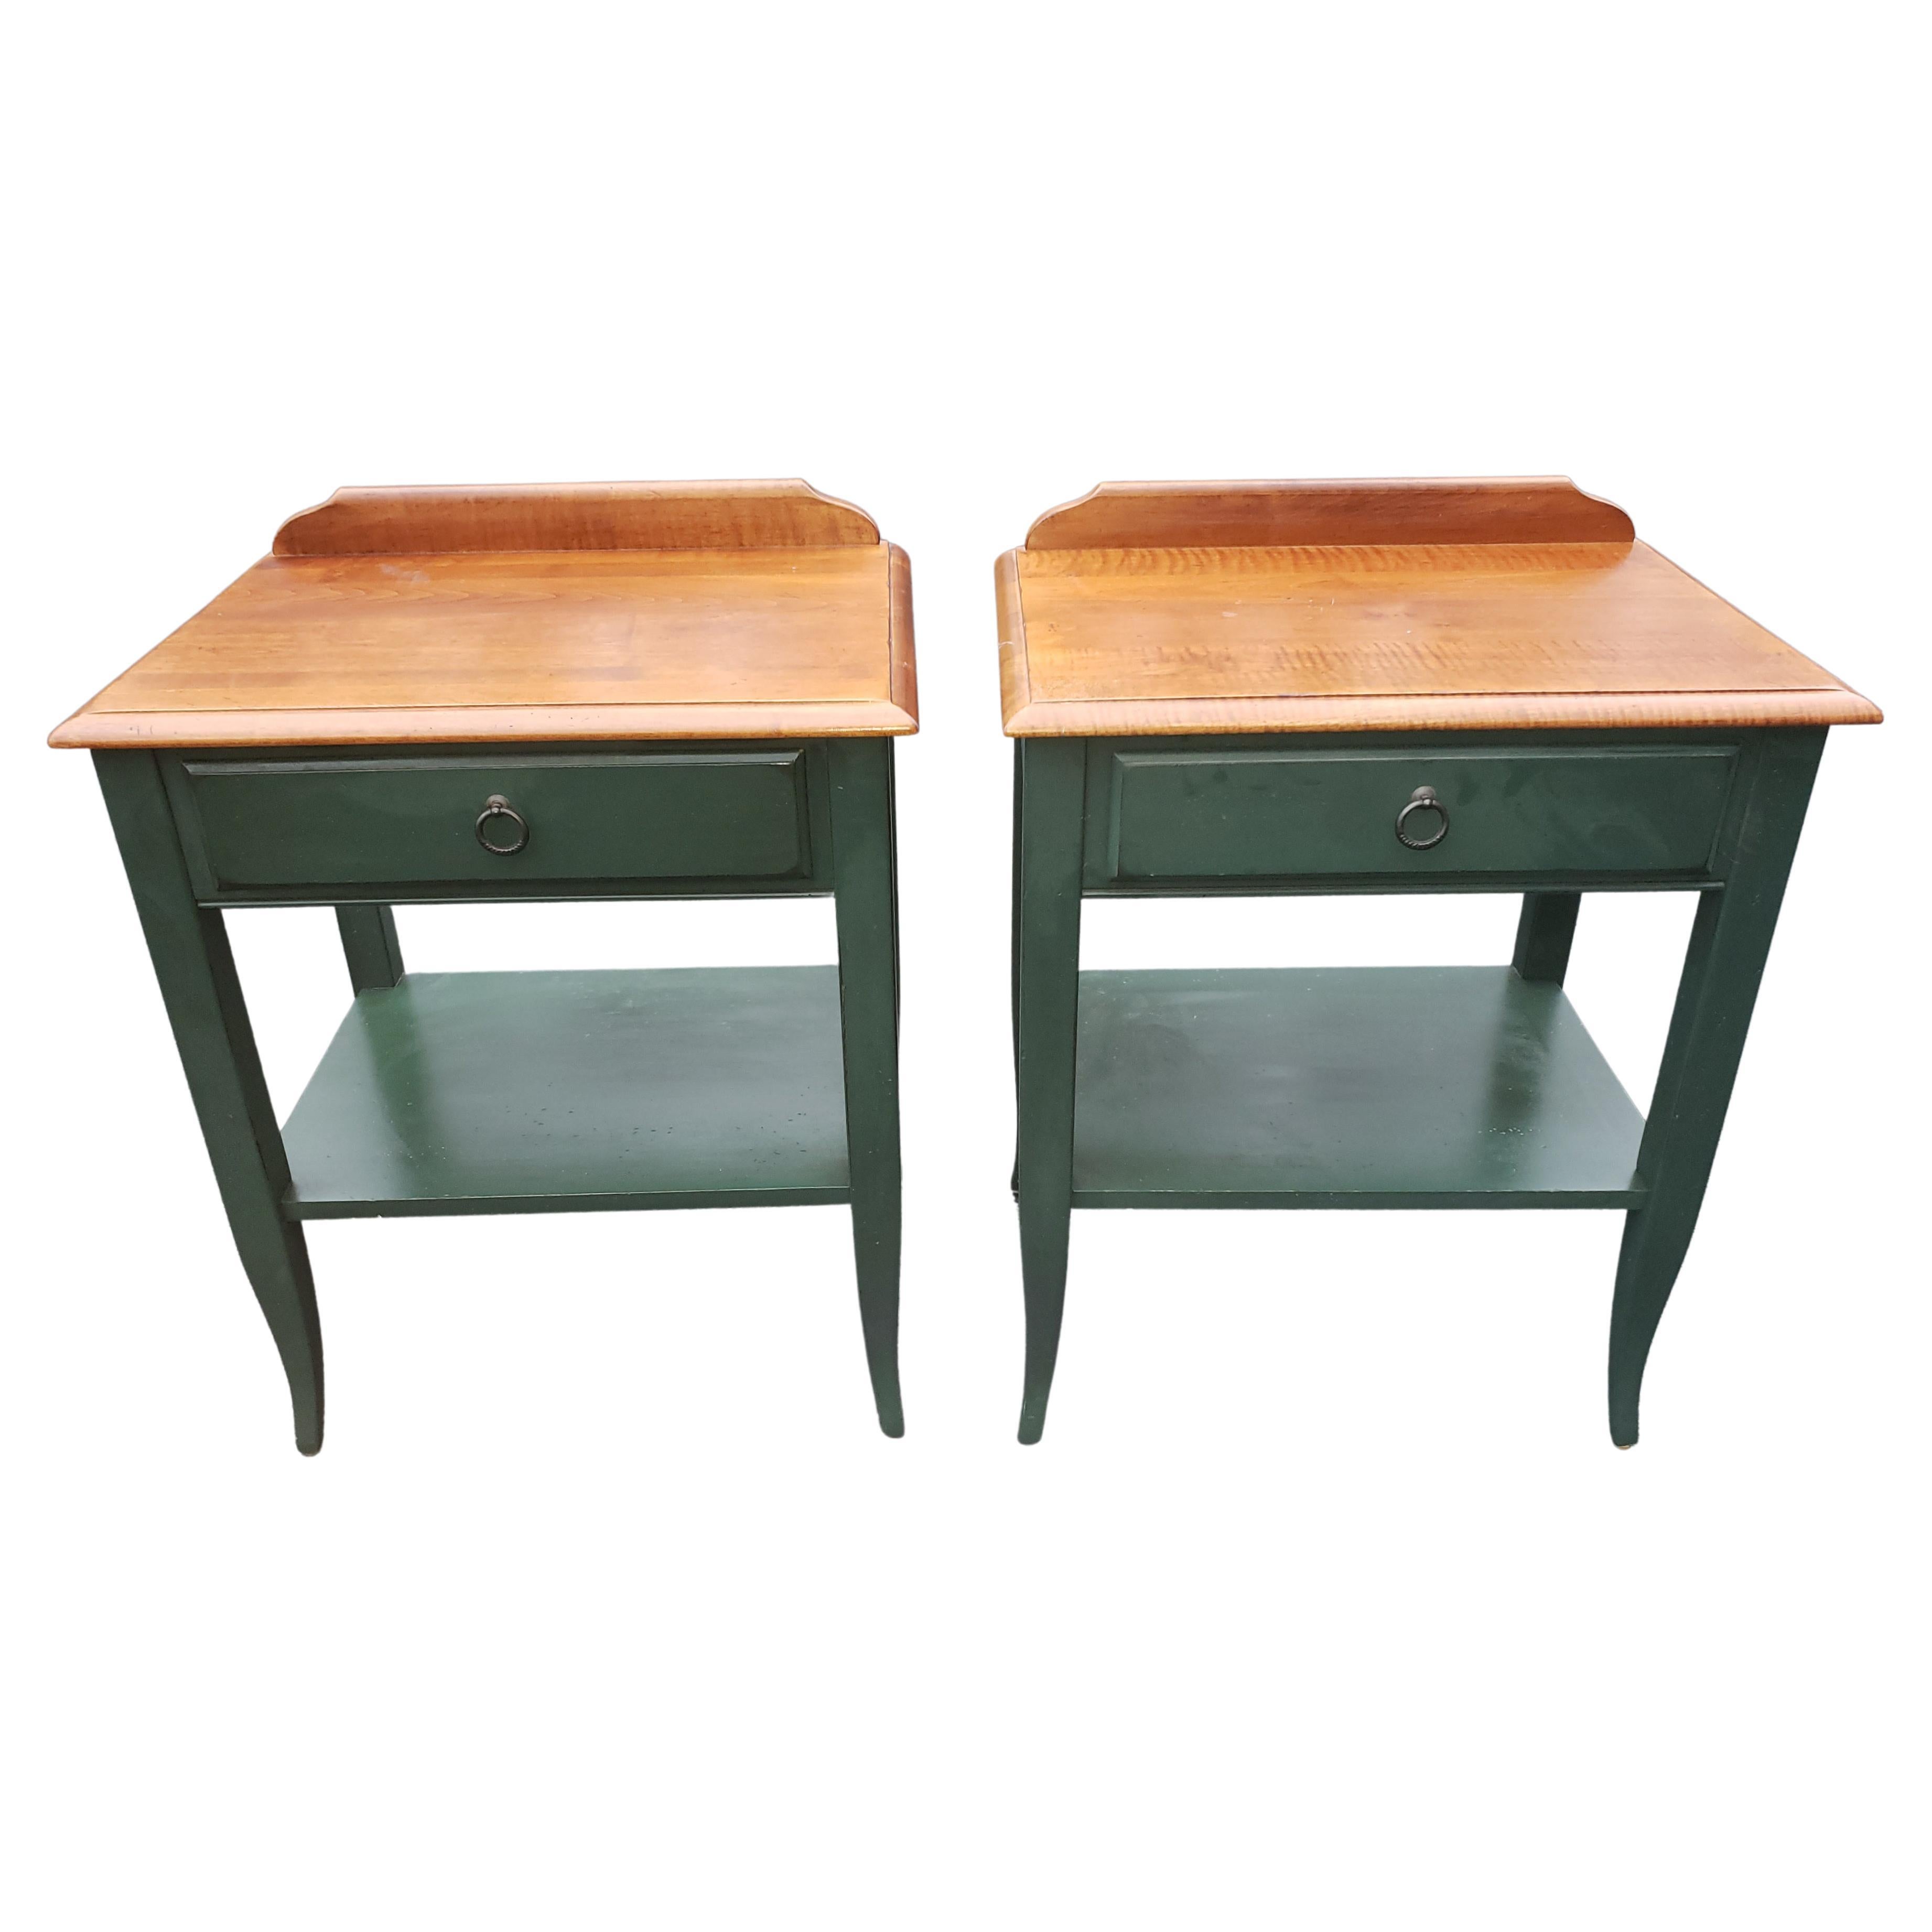 Offering for your consideration this Pair of Ethan Allen Country Crossing Collection side tables. 
Made out of solid Maple and birch. Dovetailed drawers perfectly functional. Measure 22 inches in width, 16 inches in depth and 28.5 inches in height.